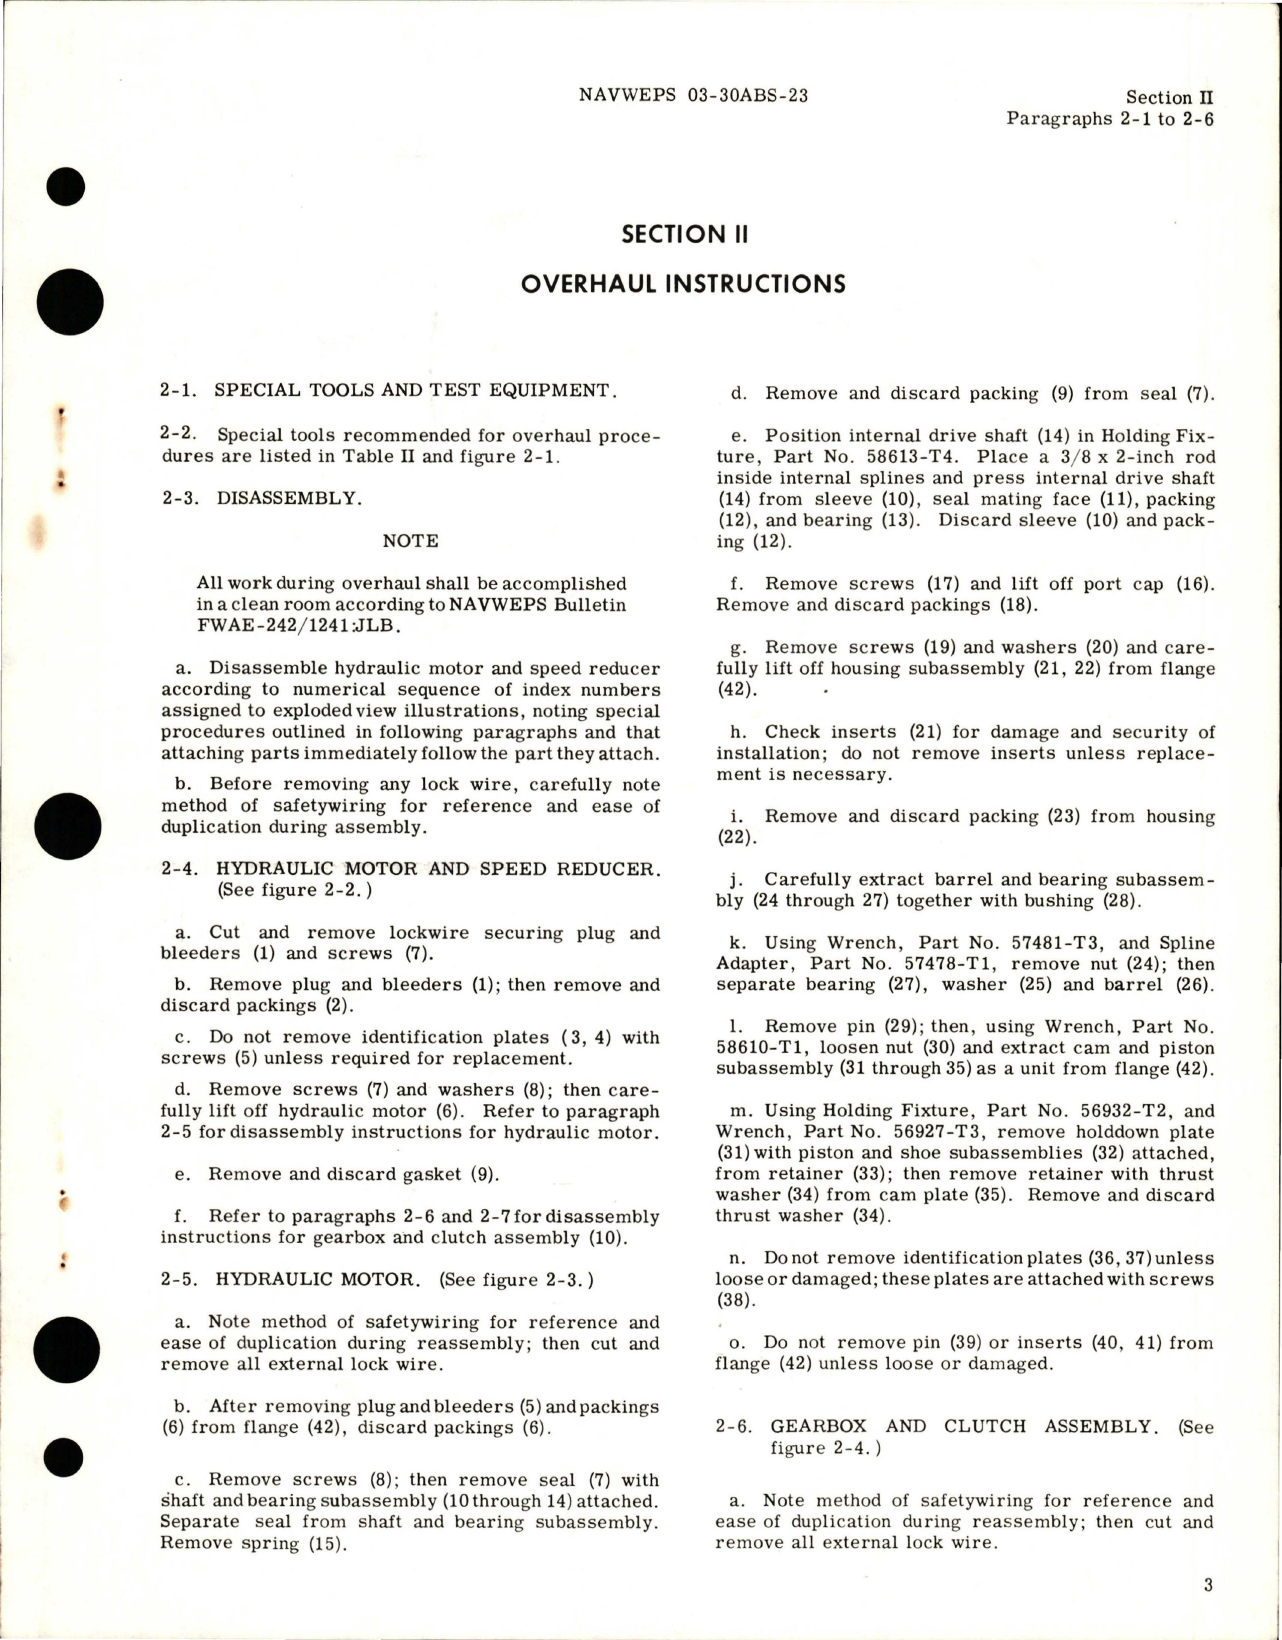 Sample page 7 from AirCorps Library document: Overhaul Instructions for Hydraulic Motor and Speed Reducer - Model FMP05C-2, Part 58115 